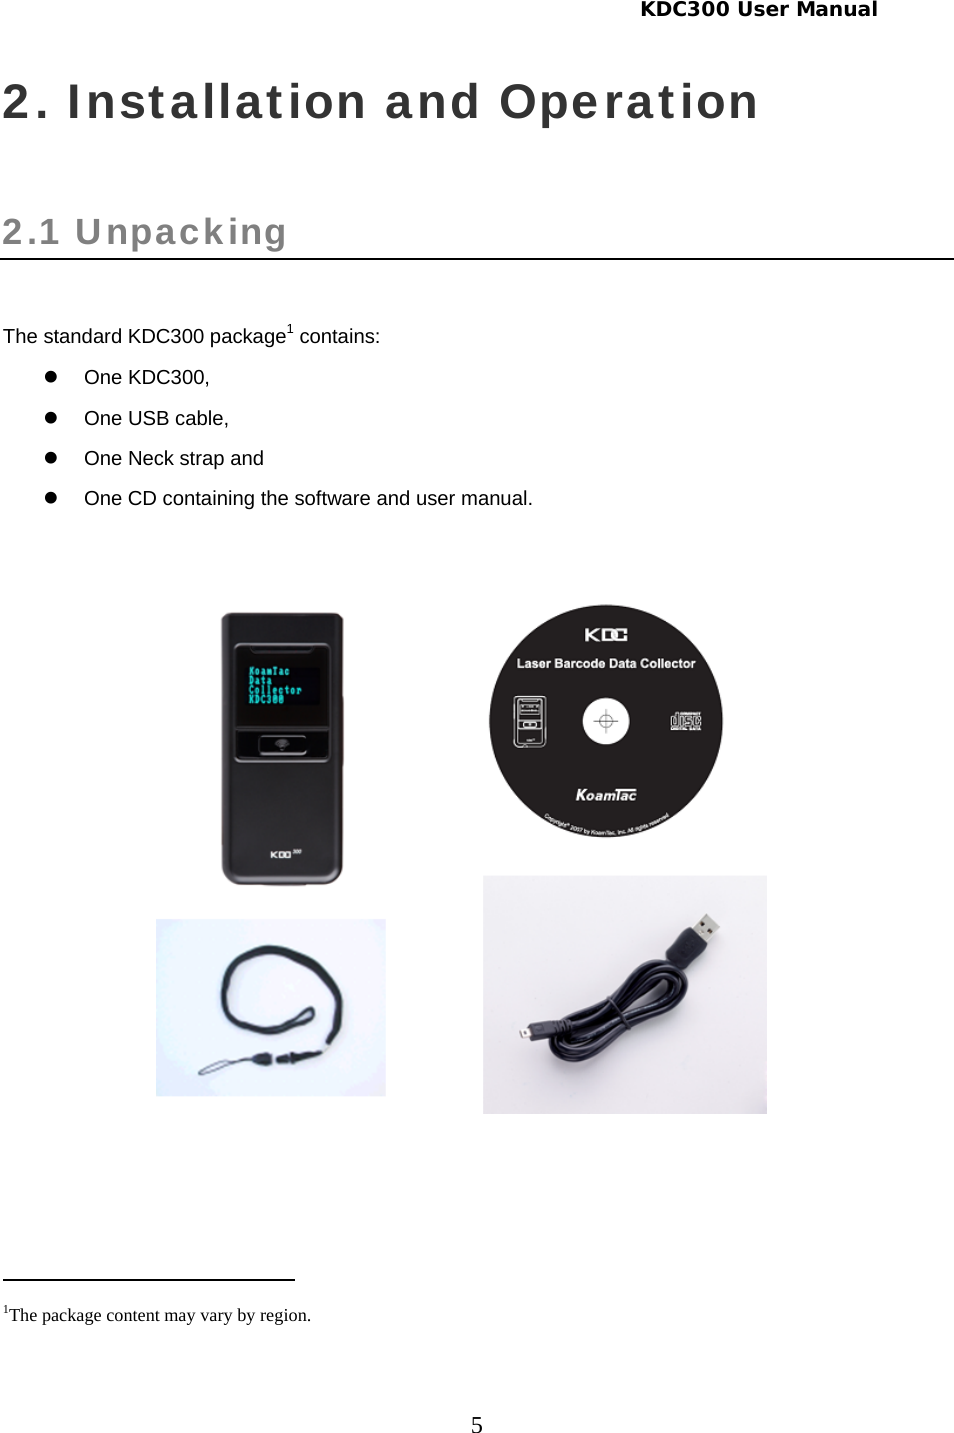     KDC300 User Manual 5 2. Installation and Operation  2.1 Unpacking   The standard KDC300 package1 contains: z One KDC300, z  One USB cable,  z  One Neck strap and  z  One CD containing the software and user manual.                                                       1The package content may vary by region. 